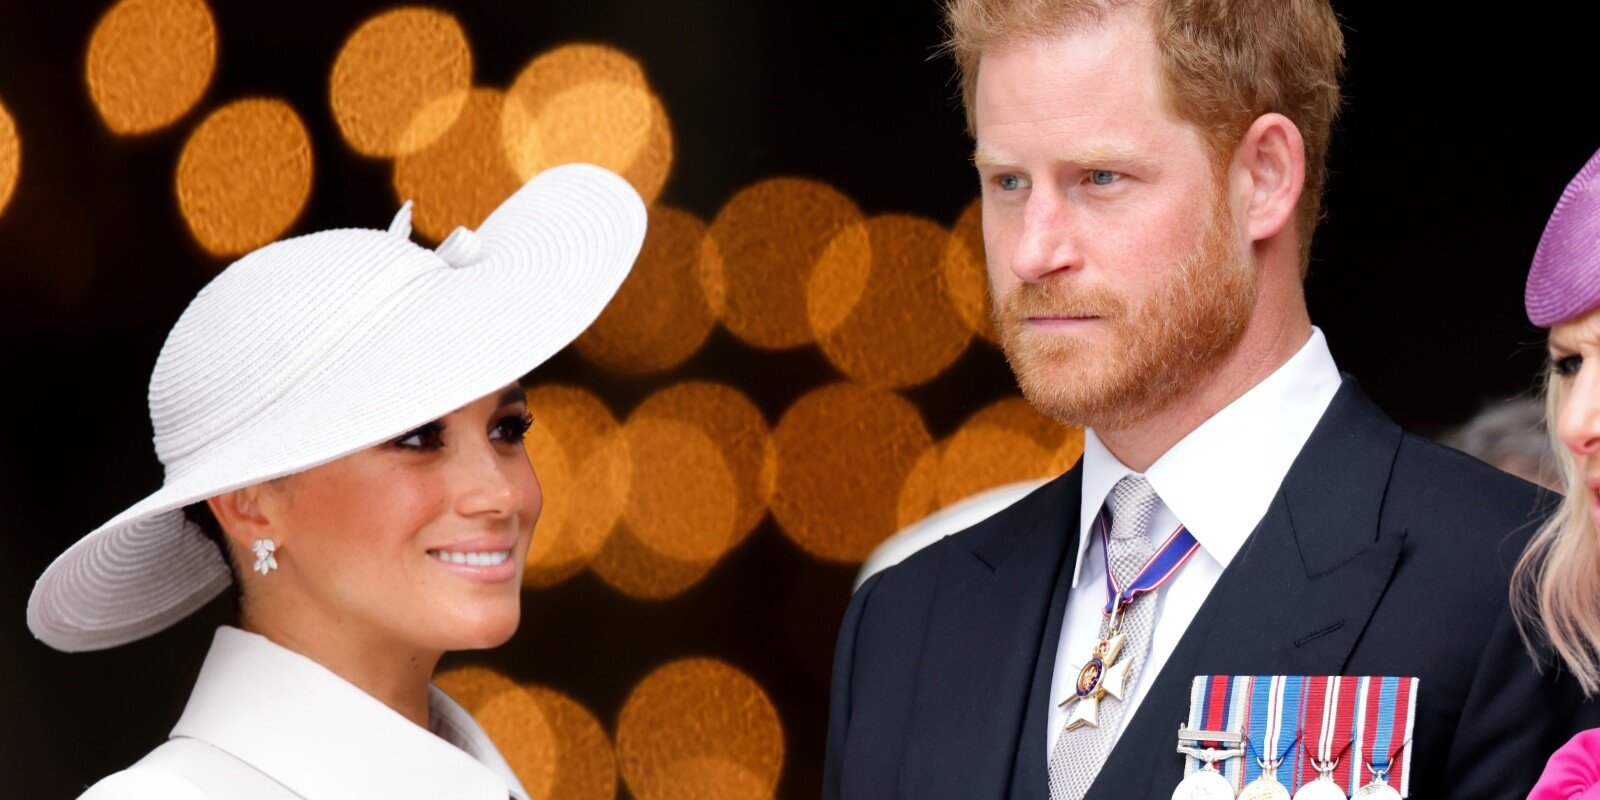 Meghan Markle and Prince Harry pose at the platinum jubilee of Queen Elizabeth in 2022.